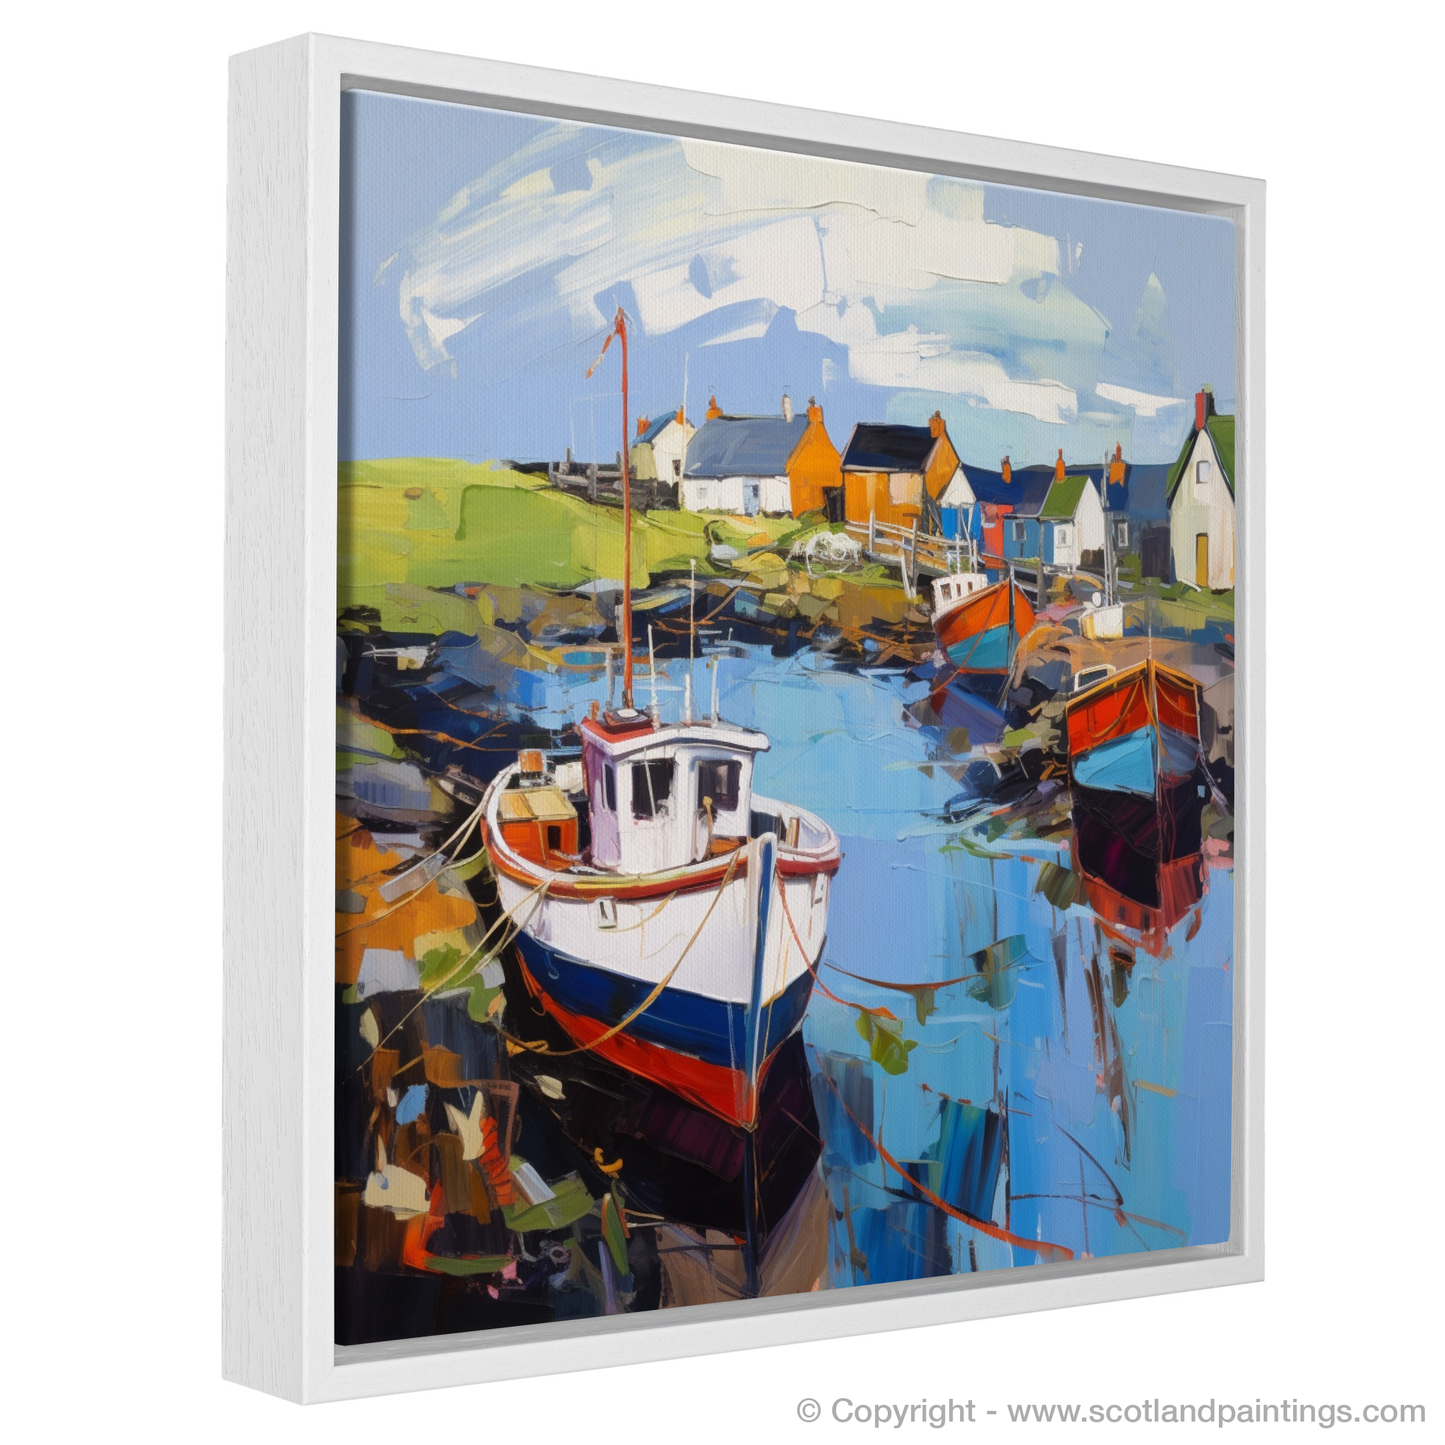 Painting and Art Print of Lybster Harbour, Caithness entitled "Lybster Harbour Vibrance: An Expressionist Ode to Caithness Coast".